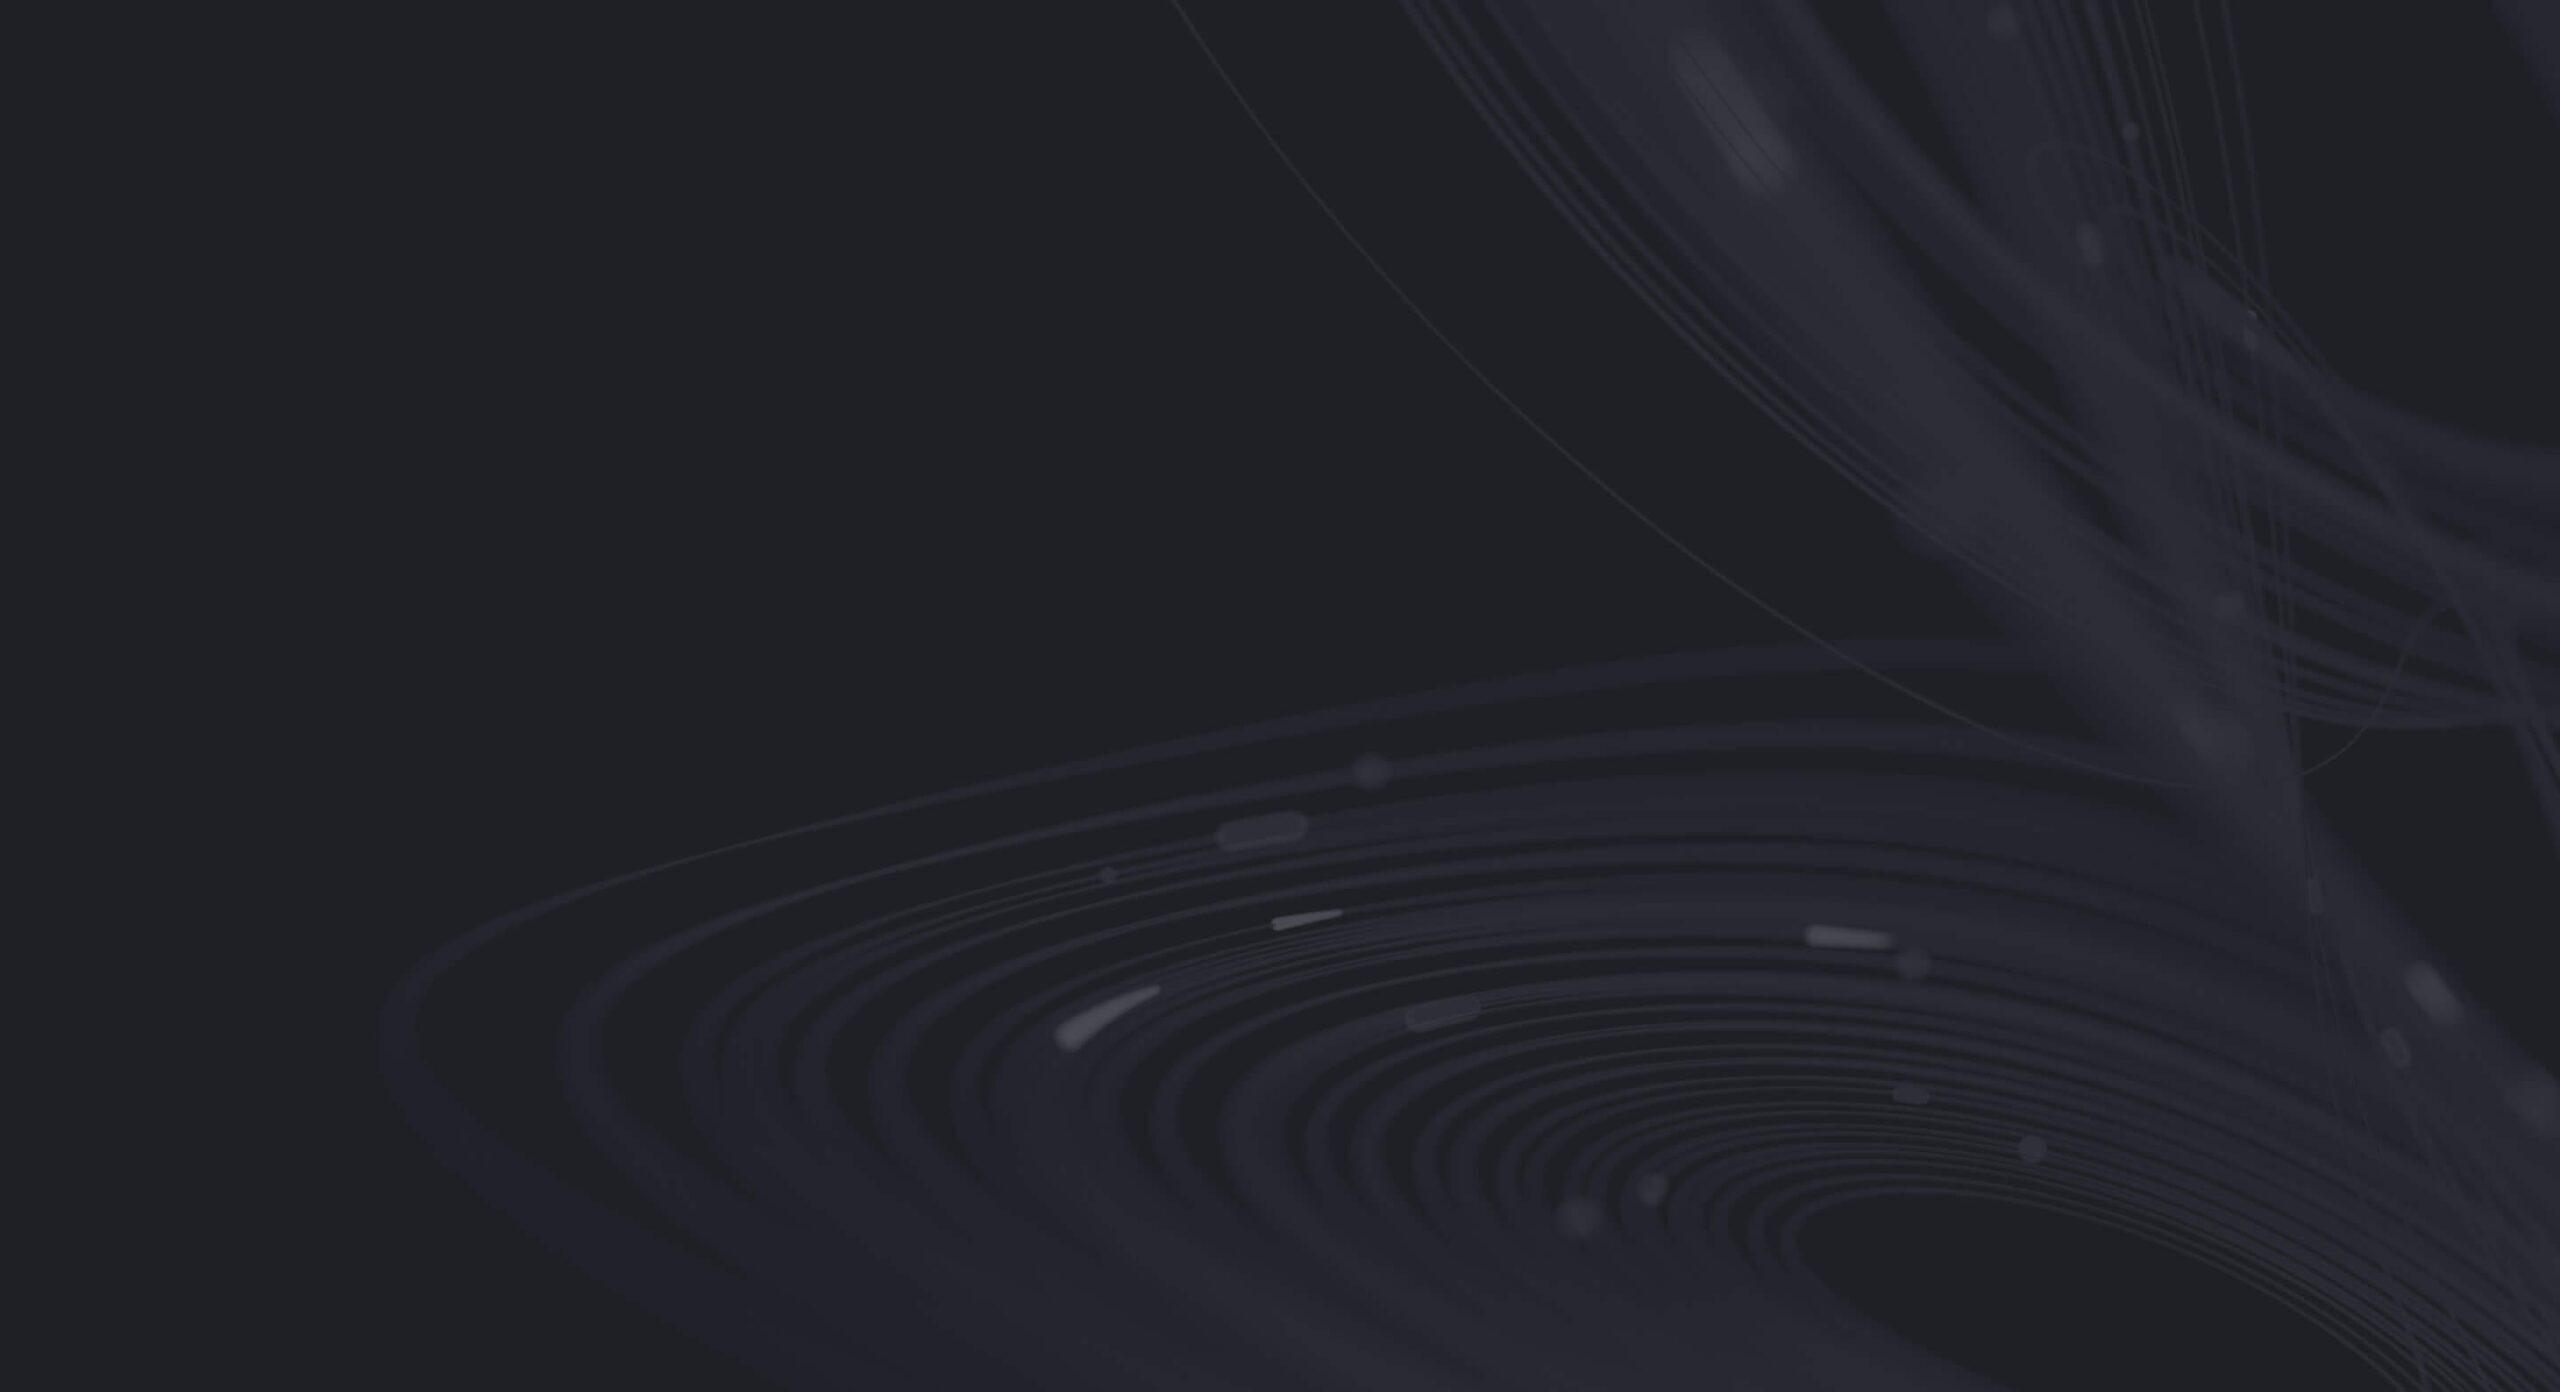 A dark abstract background with concentric ripples and subtle light accents, suggestive of digital waves or connectivity.